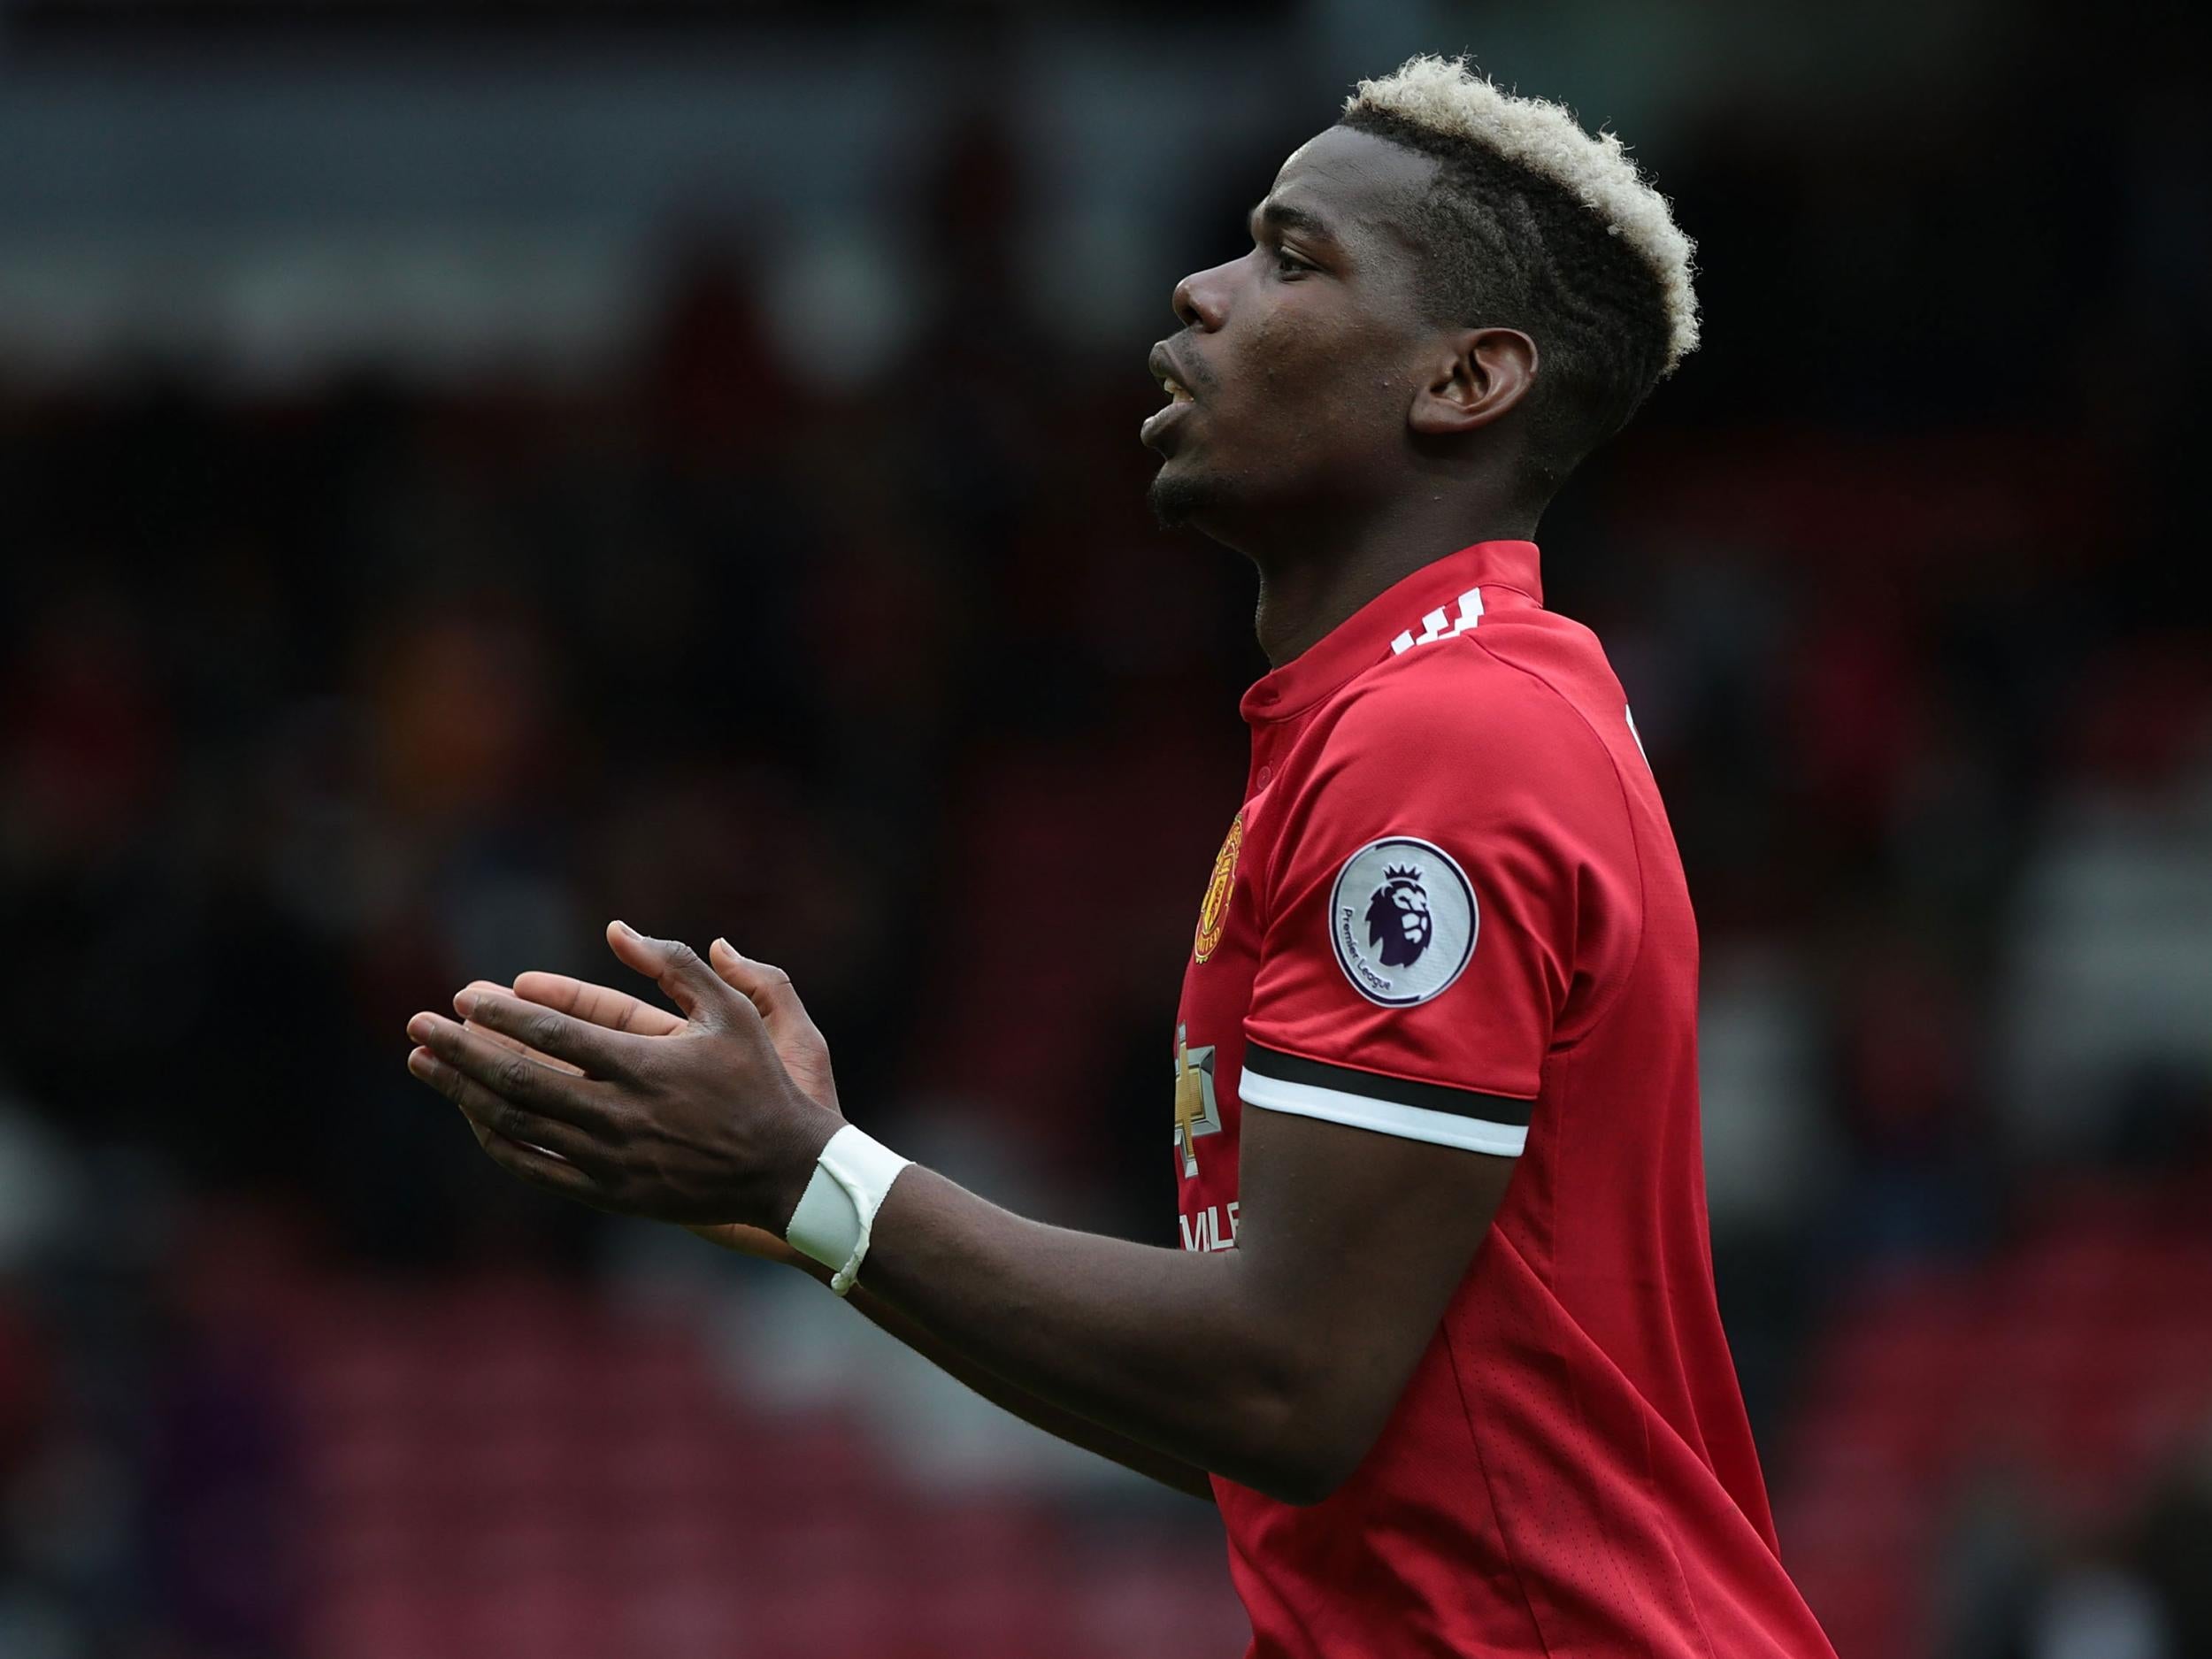 Paul Pogba has regained his place in Jose Mourinho's starting line-up